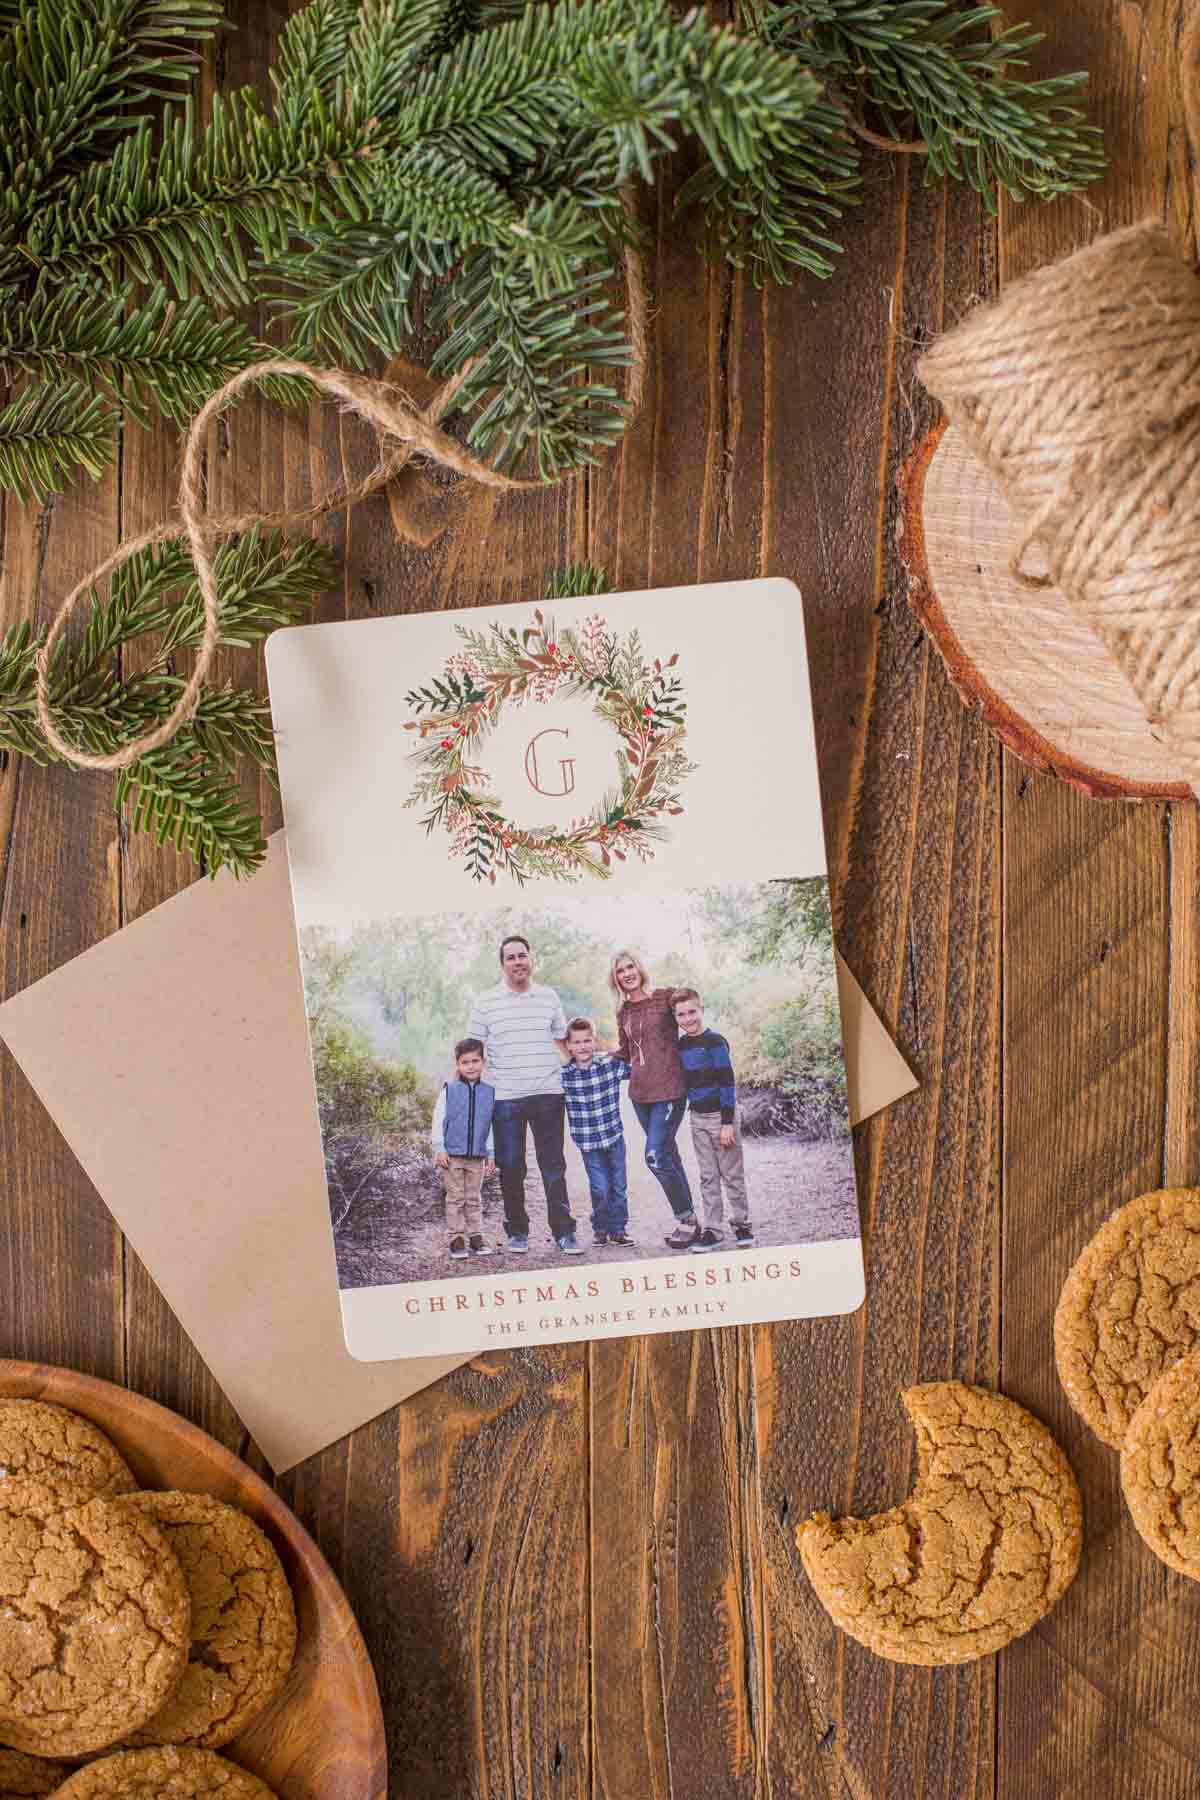 A Christmas Card that is sitting next to a plate of Old Fashioned Ginger Snaps, and some more Old Fashioned Ginger Snaps on the other side of the card, with a bite taken out of one of them. 